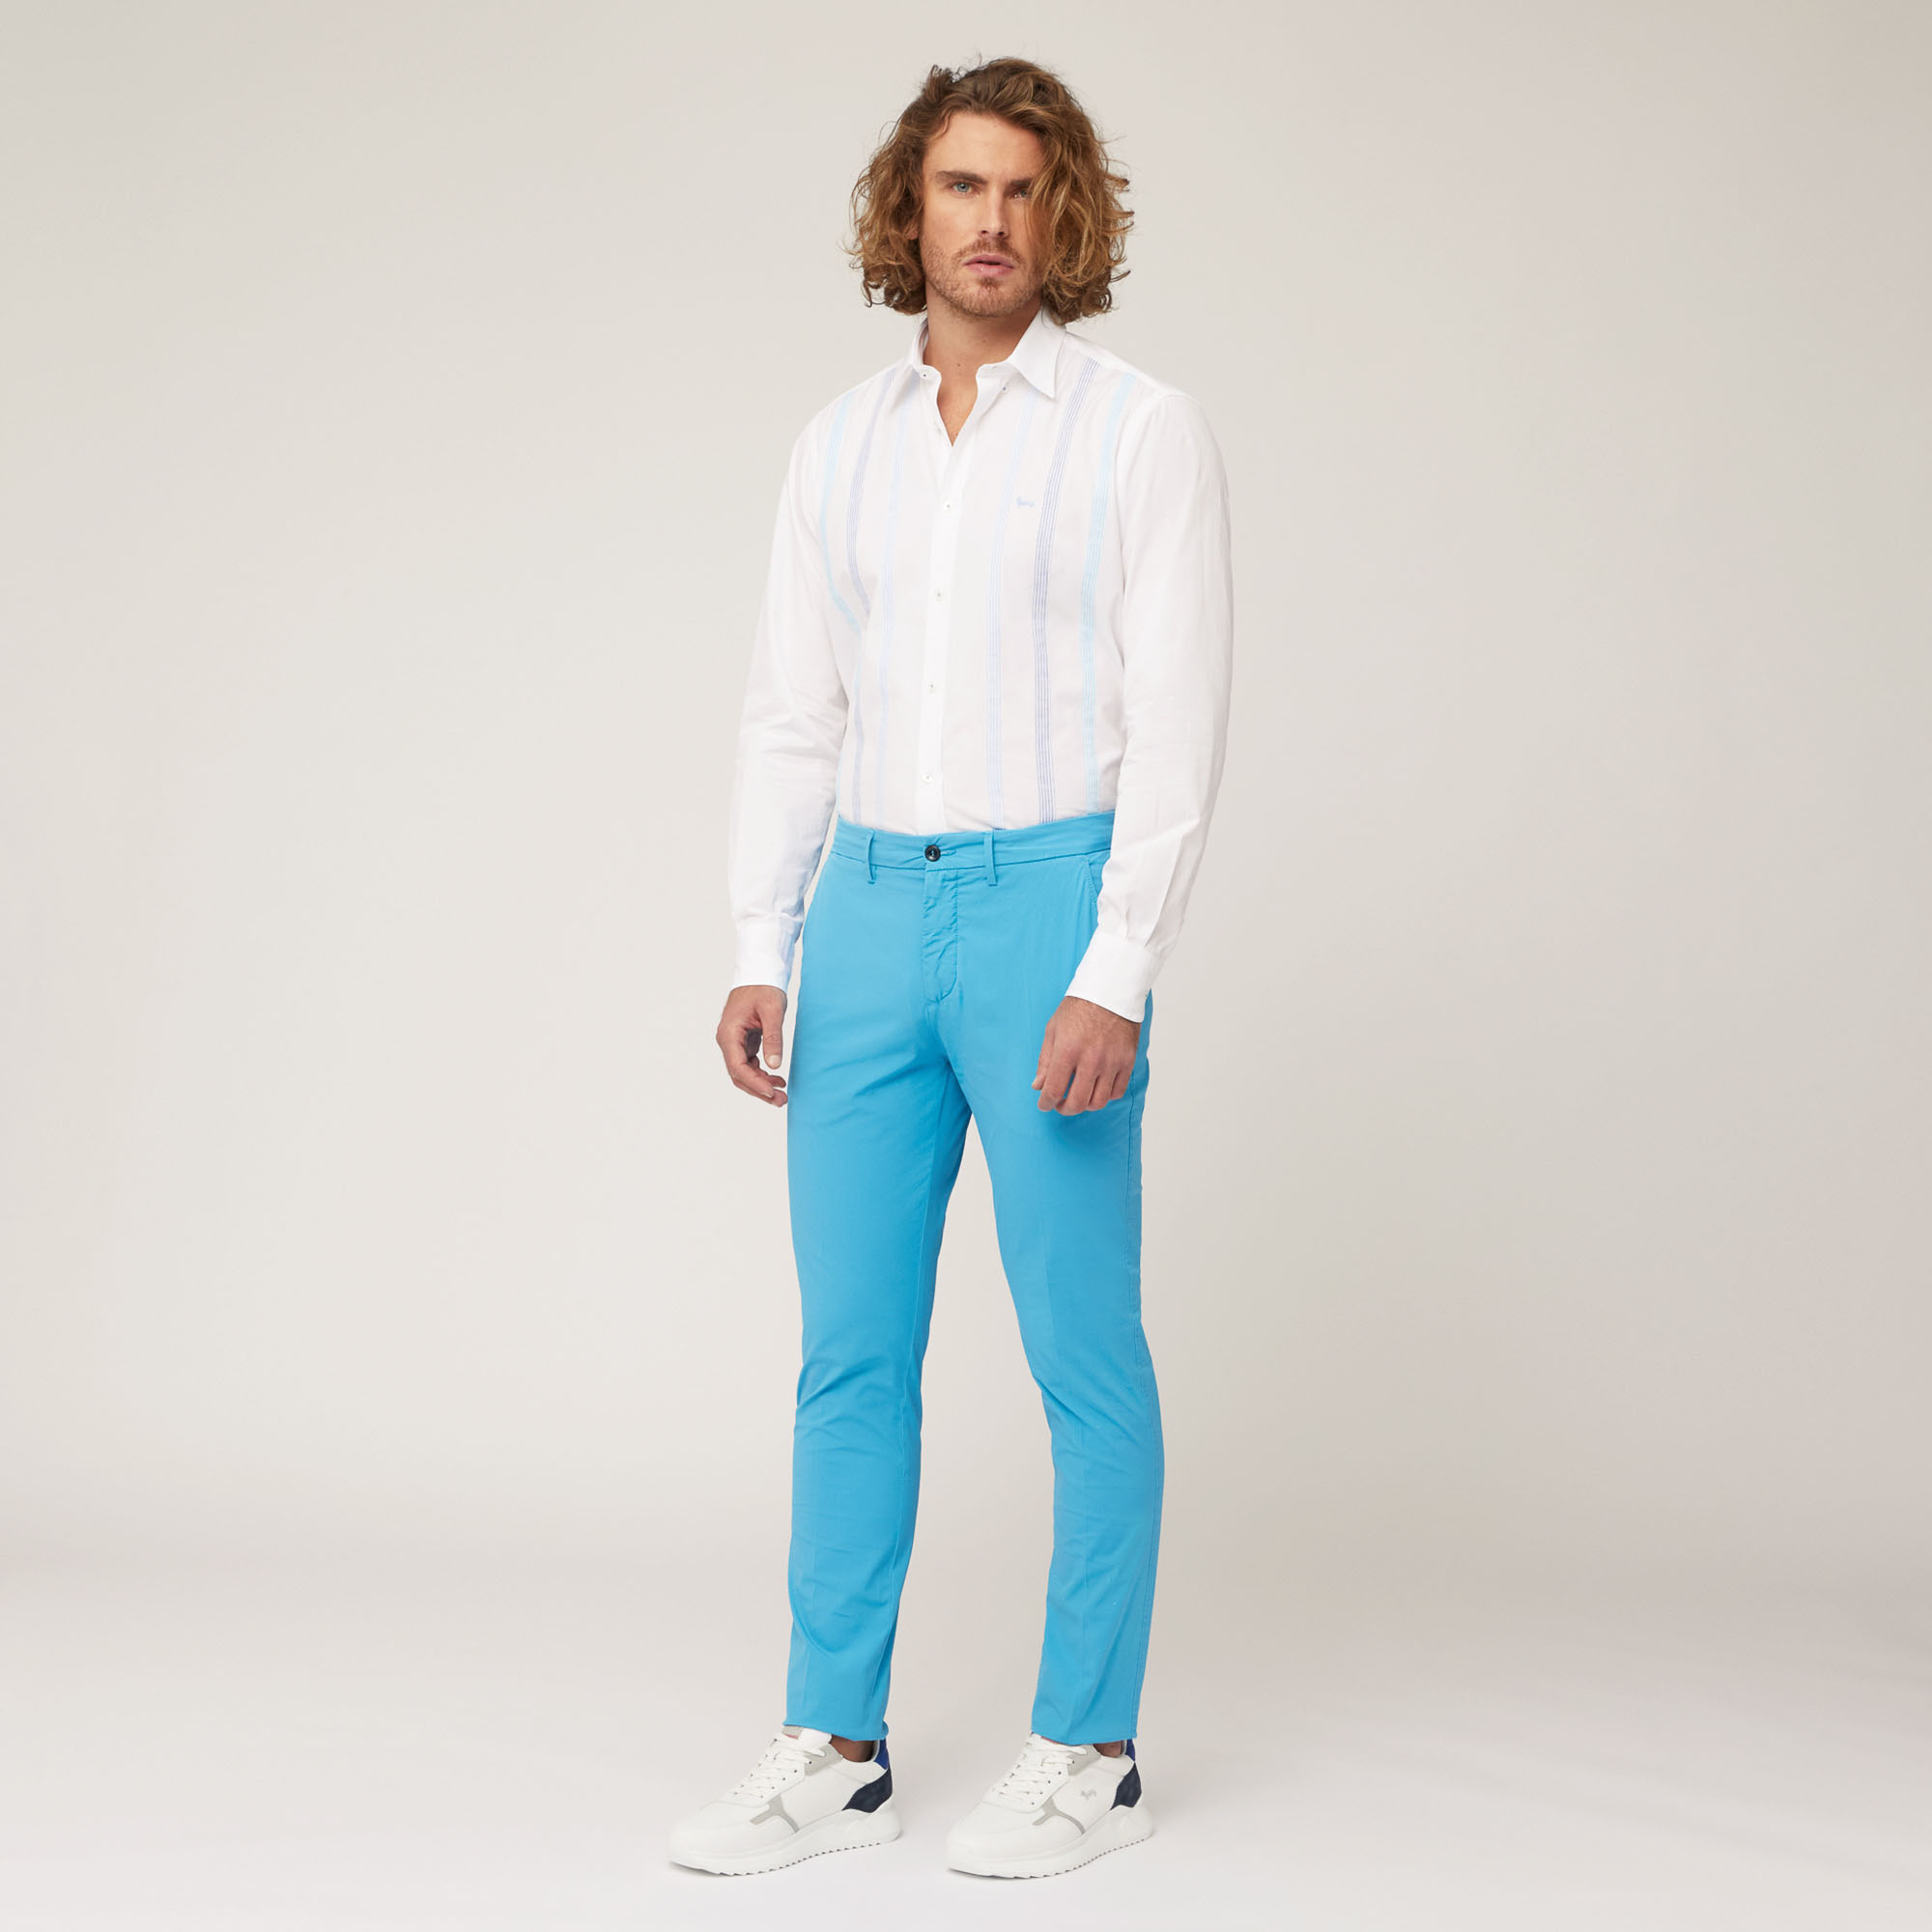 Chino-Hose Narrow Fit, Azur, large image number 3